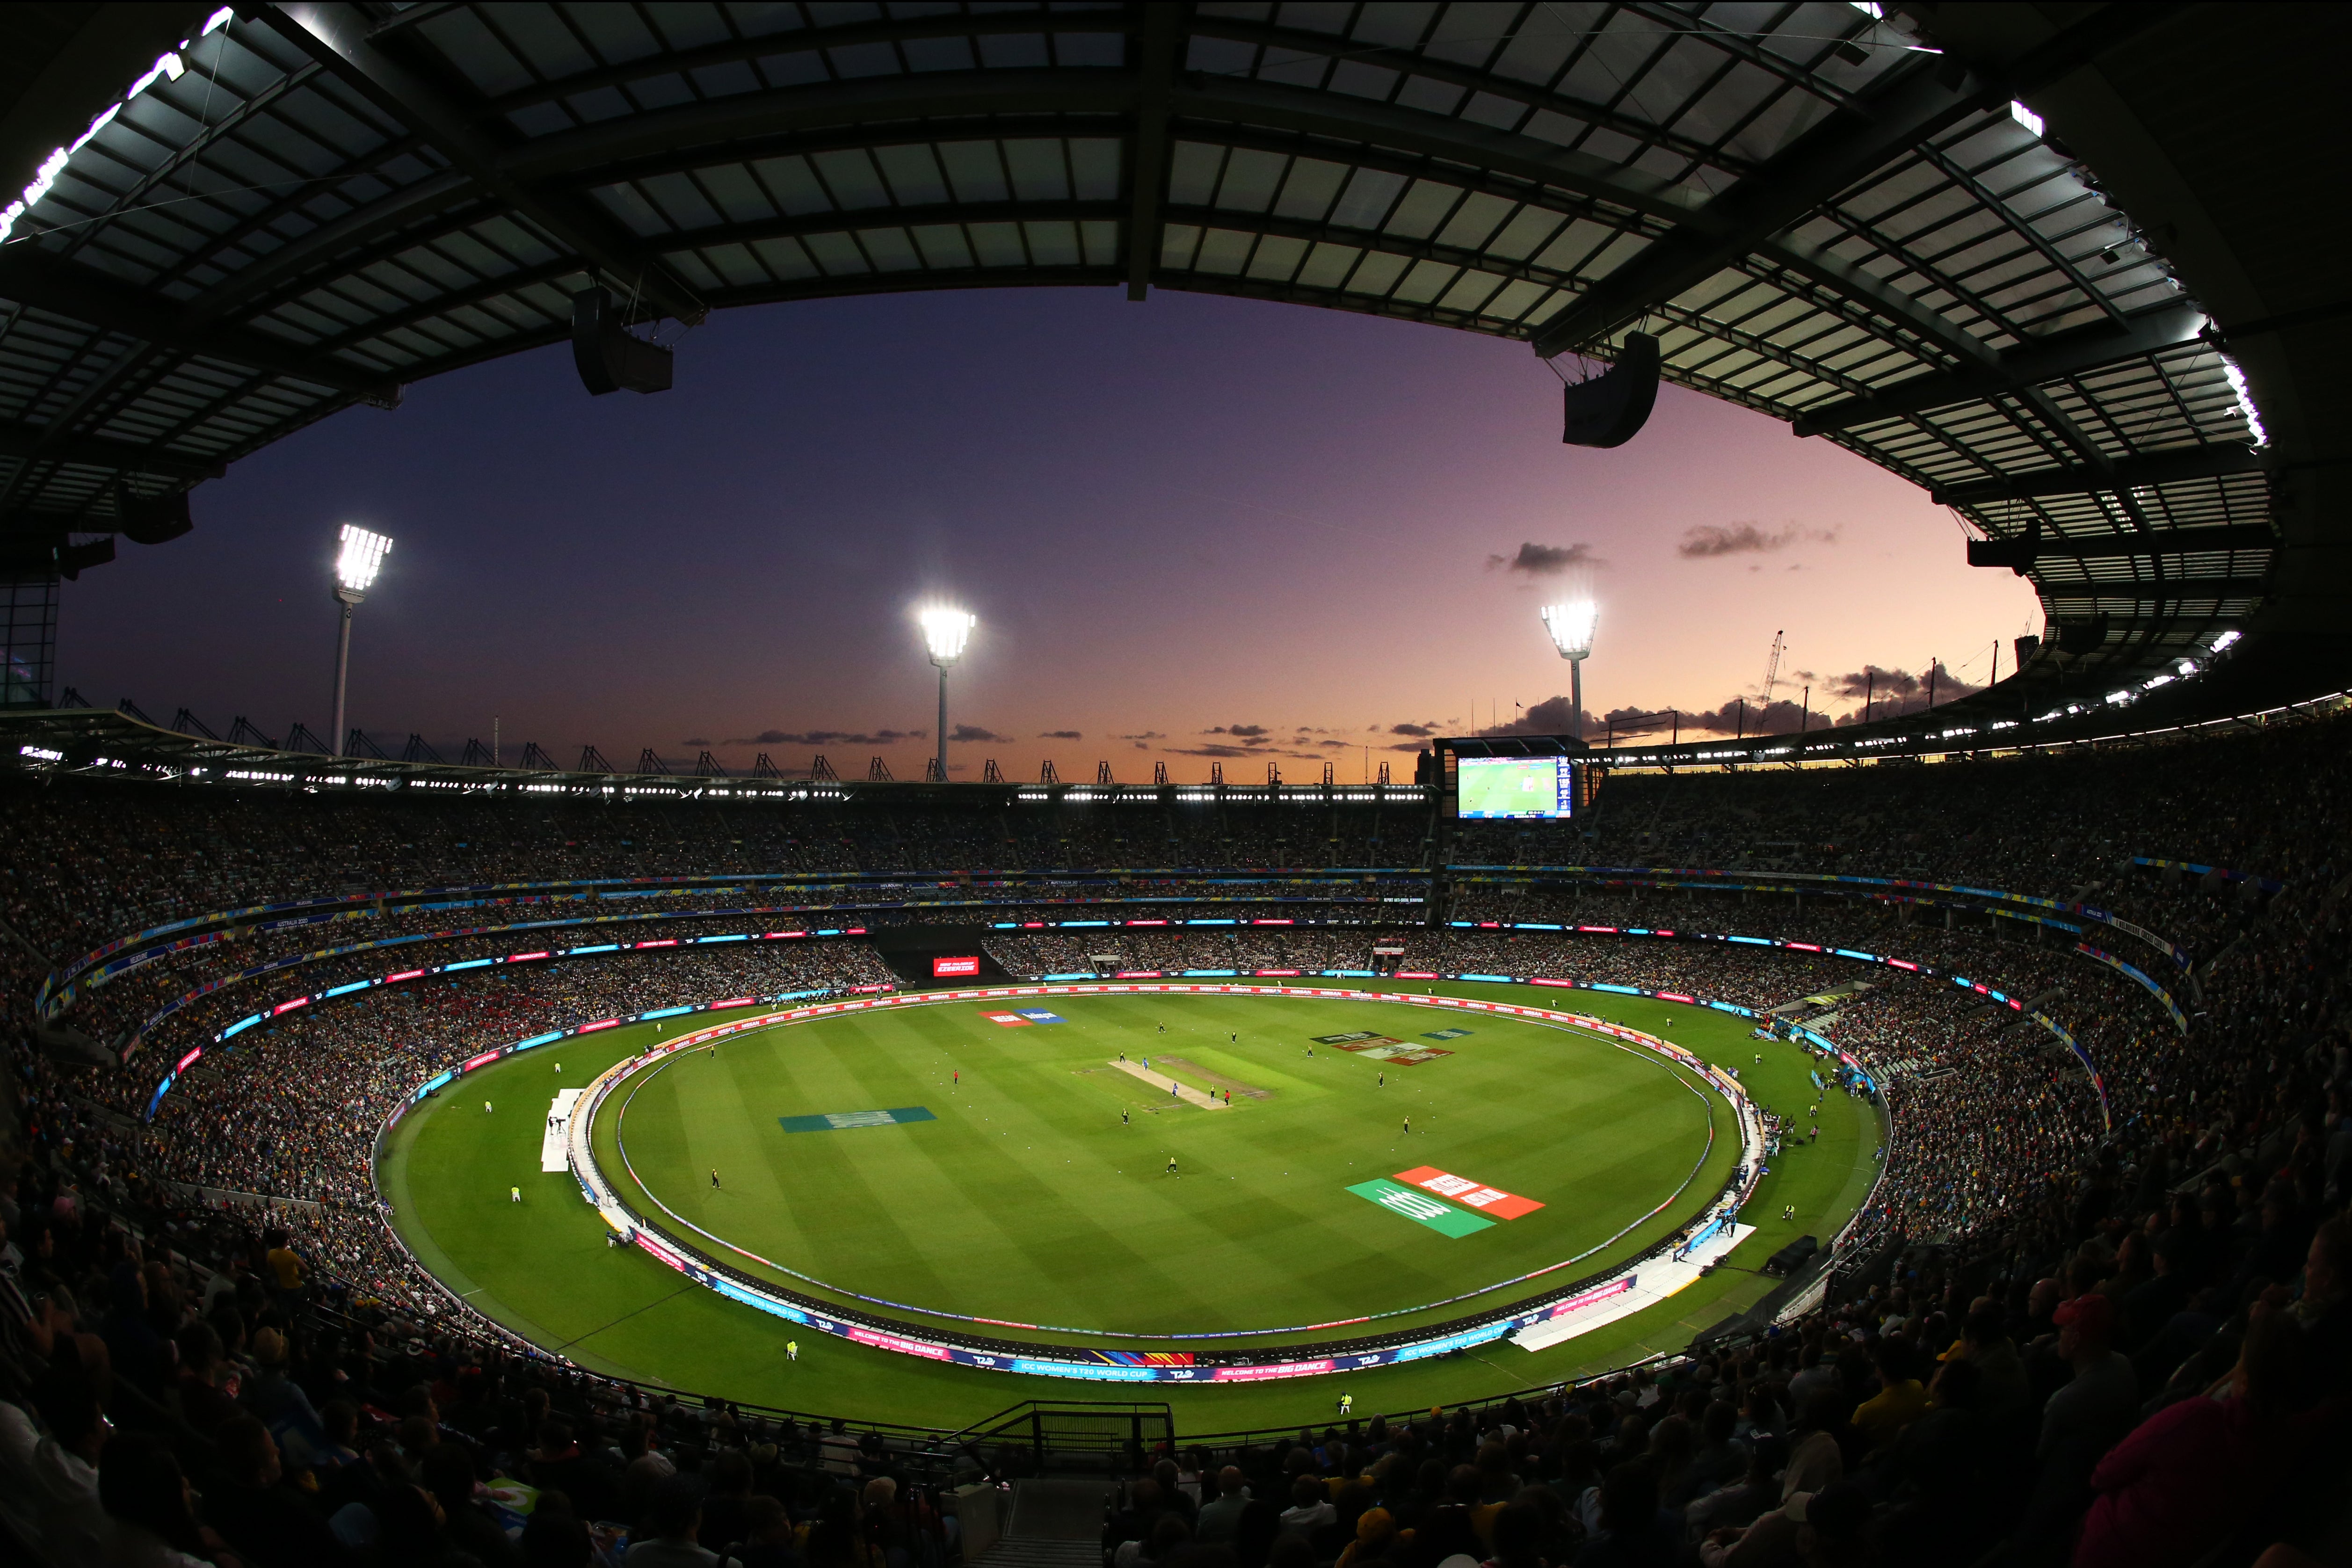 The MCG hosted the 2020 Women’s T20 World Cup final